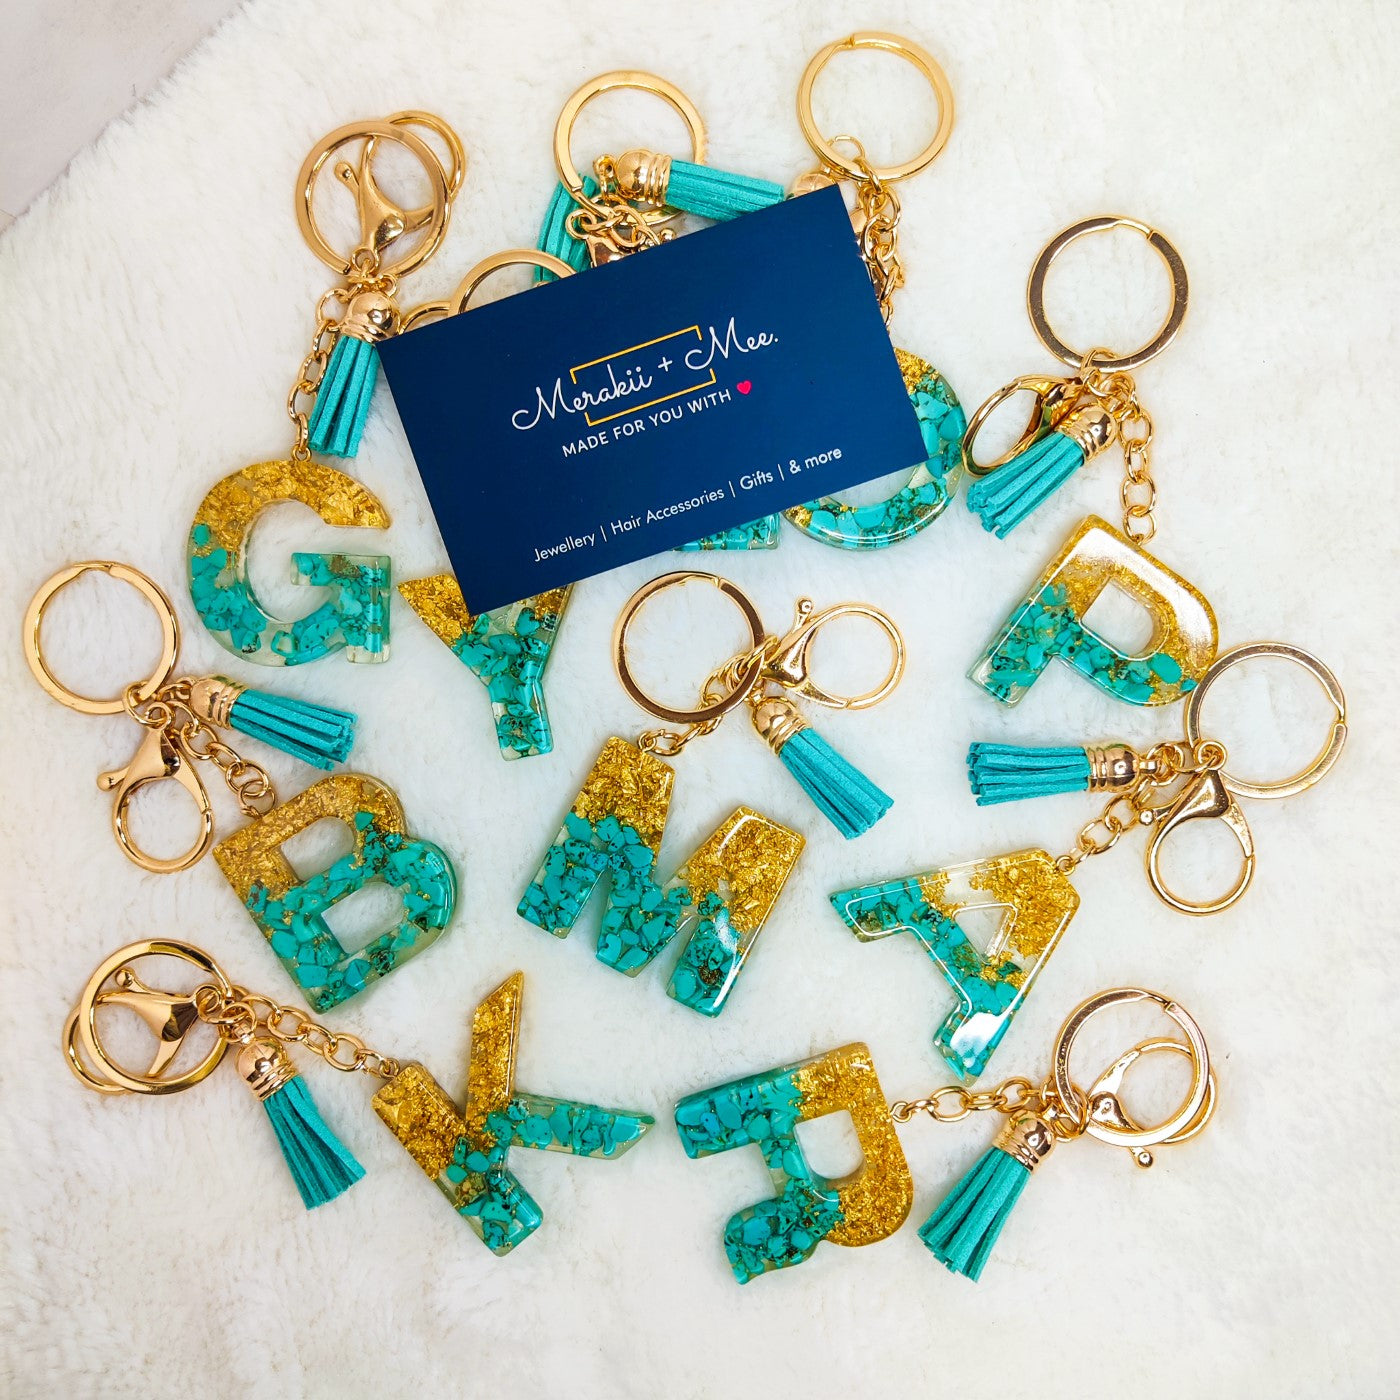 Premium Resin Art Initial Letter Keychains with Hook and Tassel